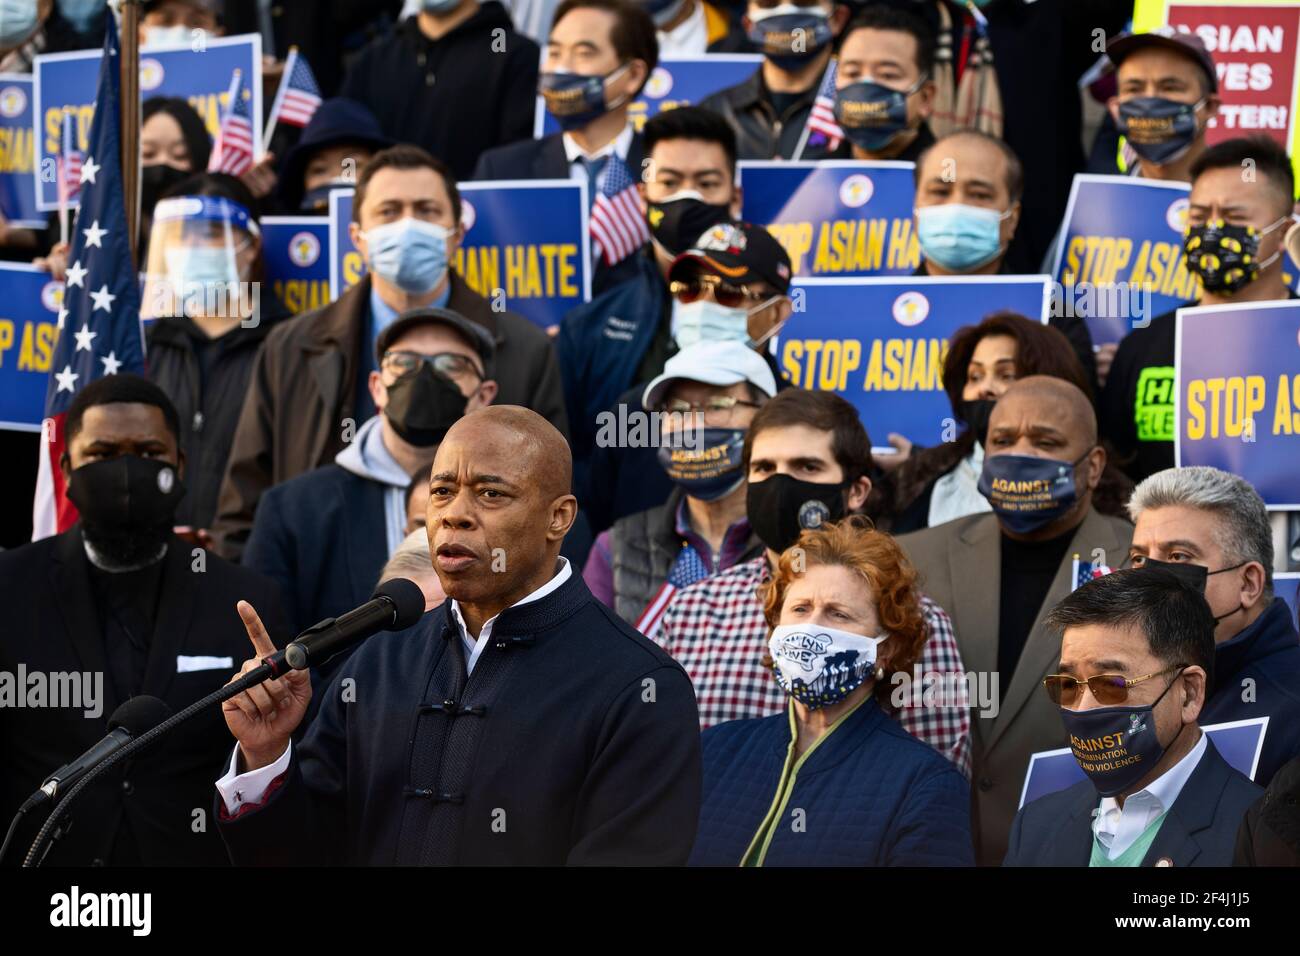 Brooklyn, New York, USA. 21 March 2021 Brooklyn Borough President Eric Adams speaks during rally against violence and discrimination after recent attacks against Asian-Americans in New York City and across the U.S. during COVID-19 pandemic.  Adams is running for mayor of New York City this year. Credit: Joseph Reid/Alamy Live News Stock Photo